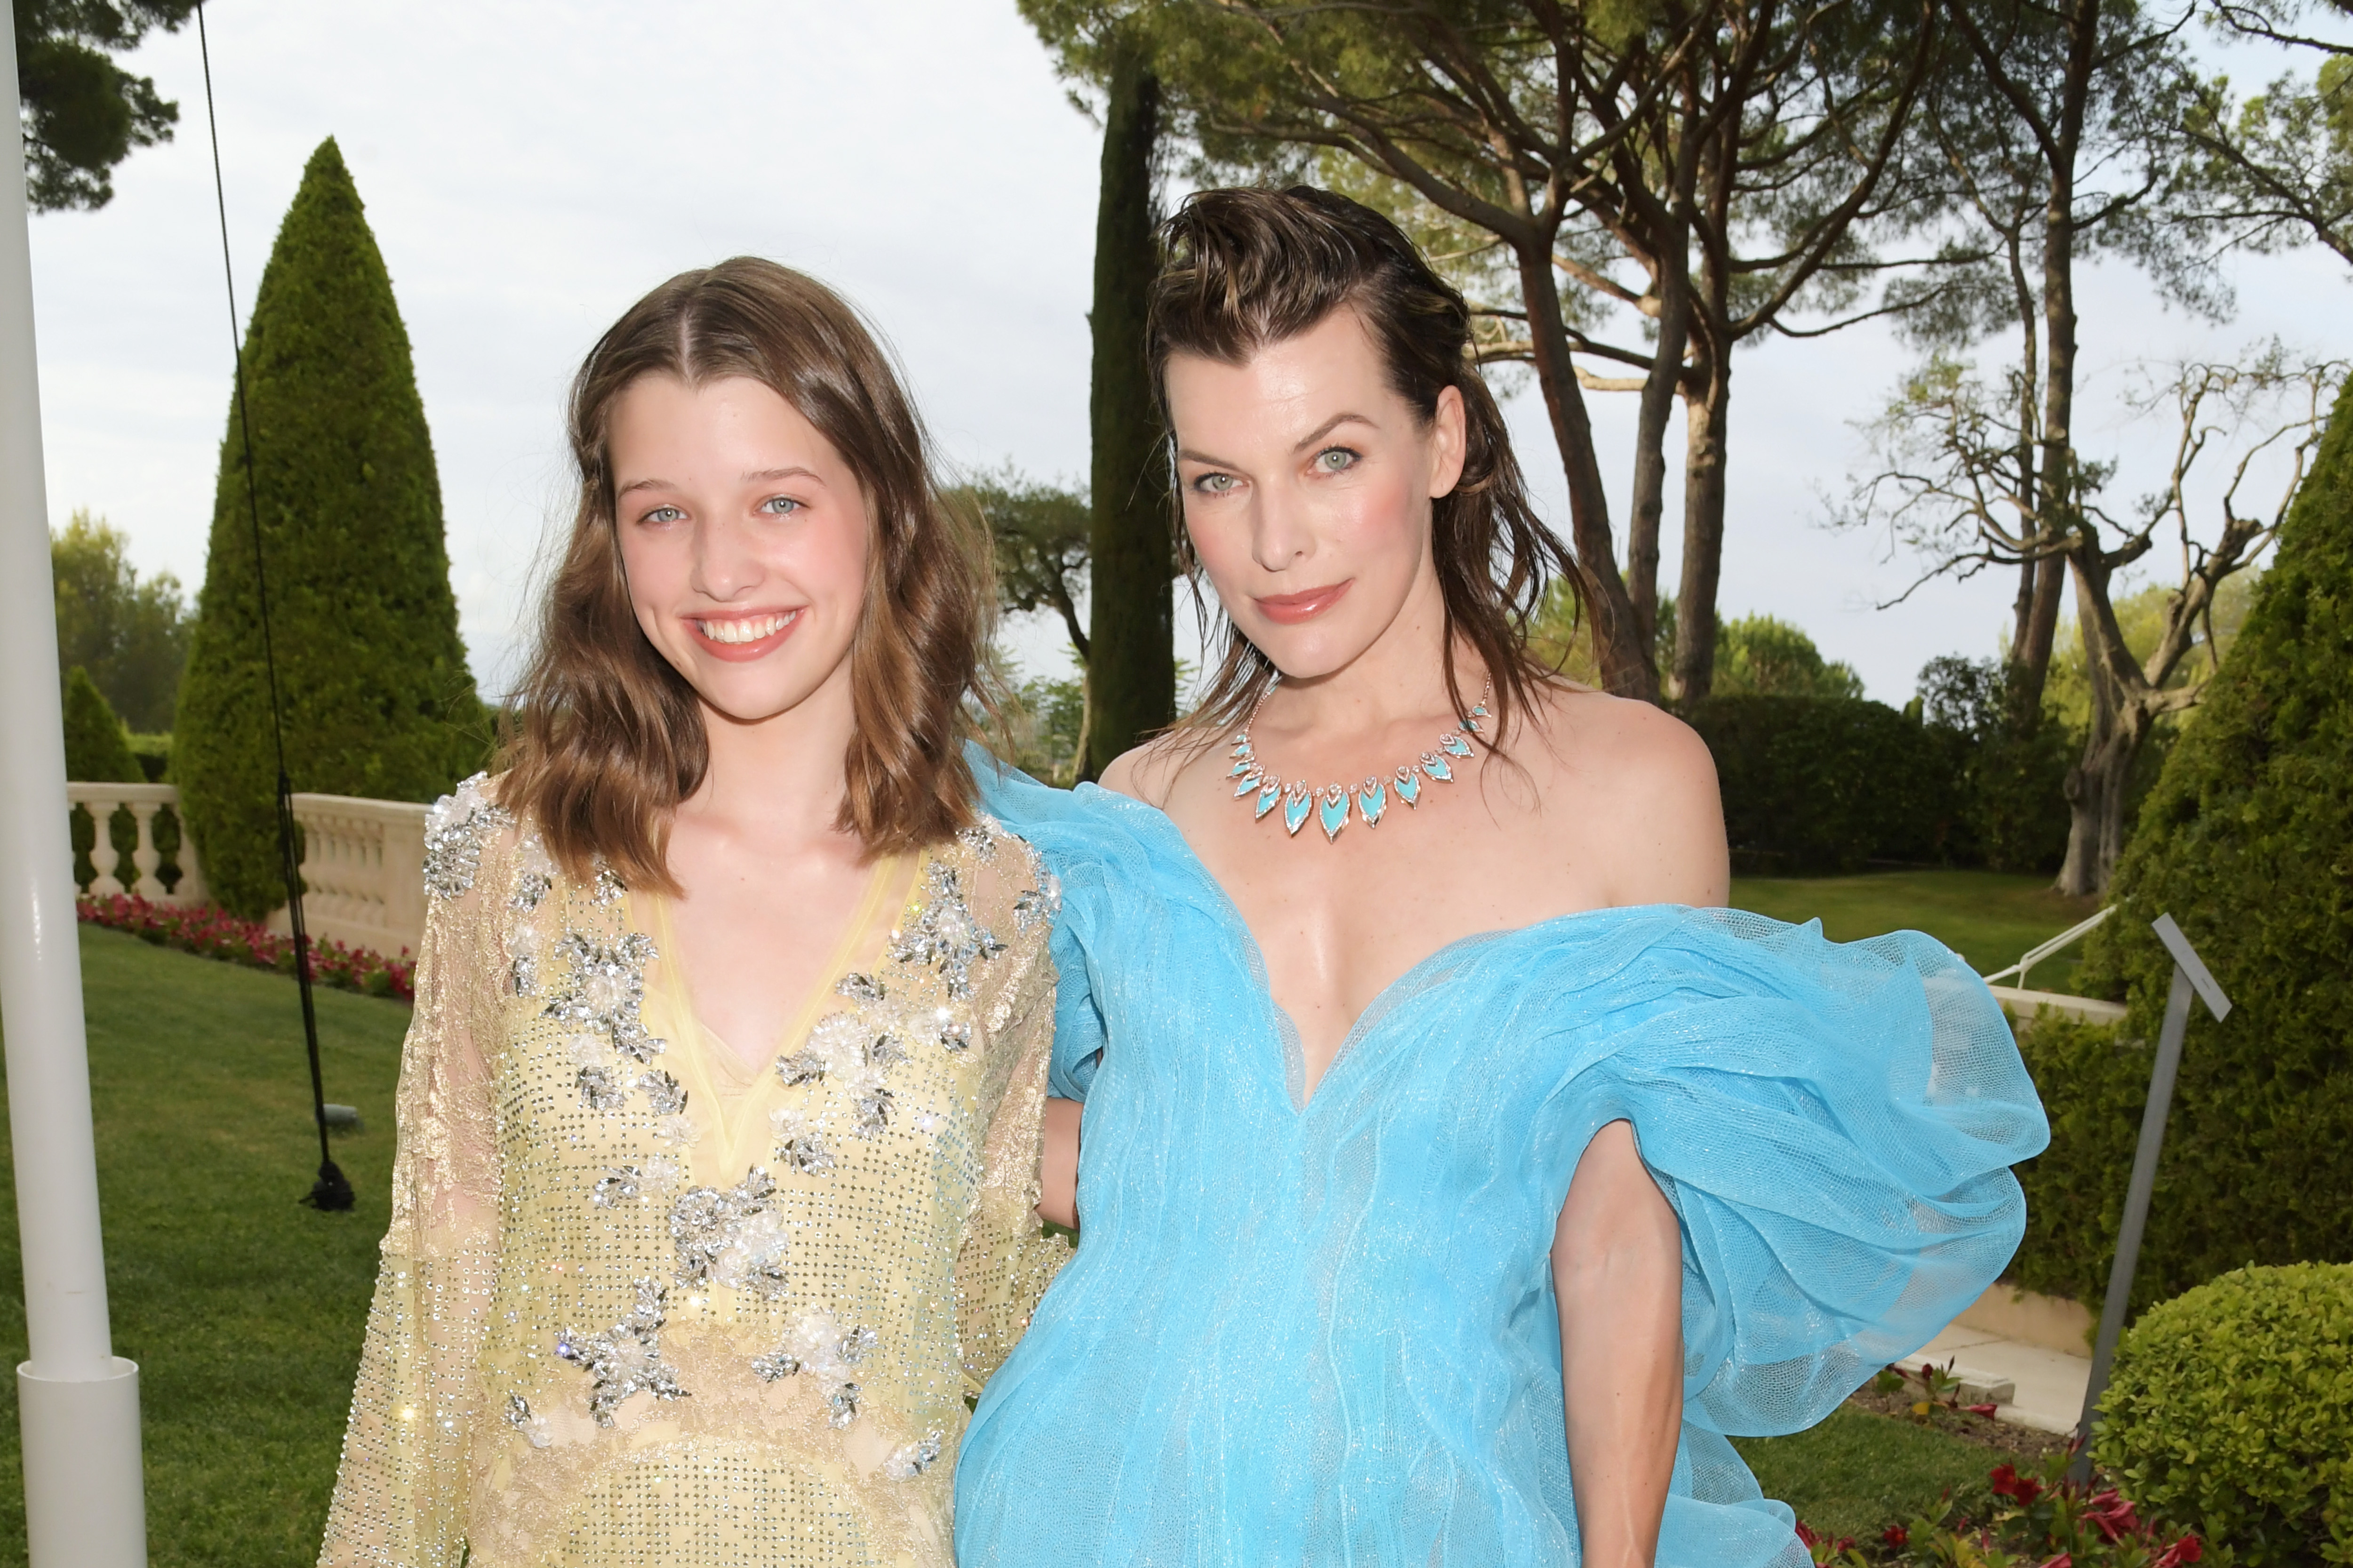 Ever Gabo Anderson and Milla Jovovich attend the amfAR Gala Cannes 2022 on May 26, 2022 in Cap d'Antibes, Côte d'Azur | Source: Getty Images